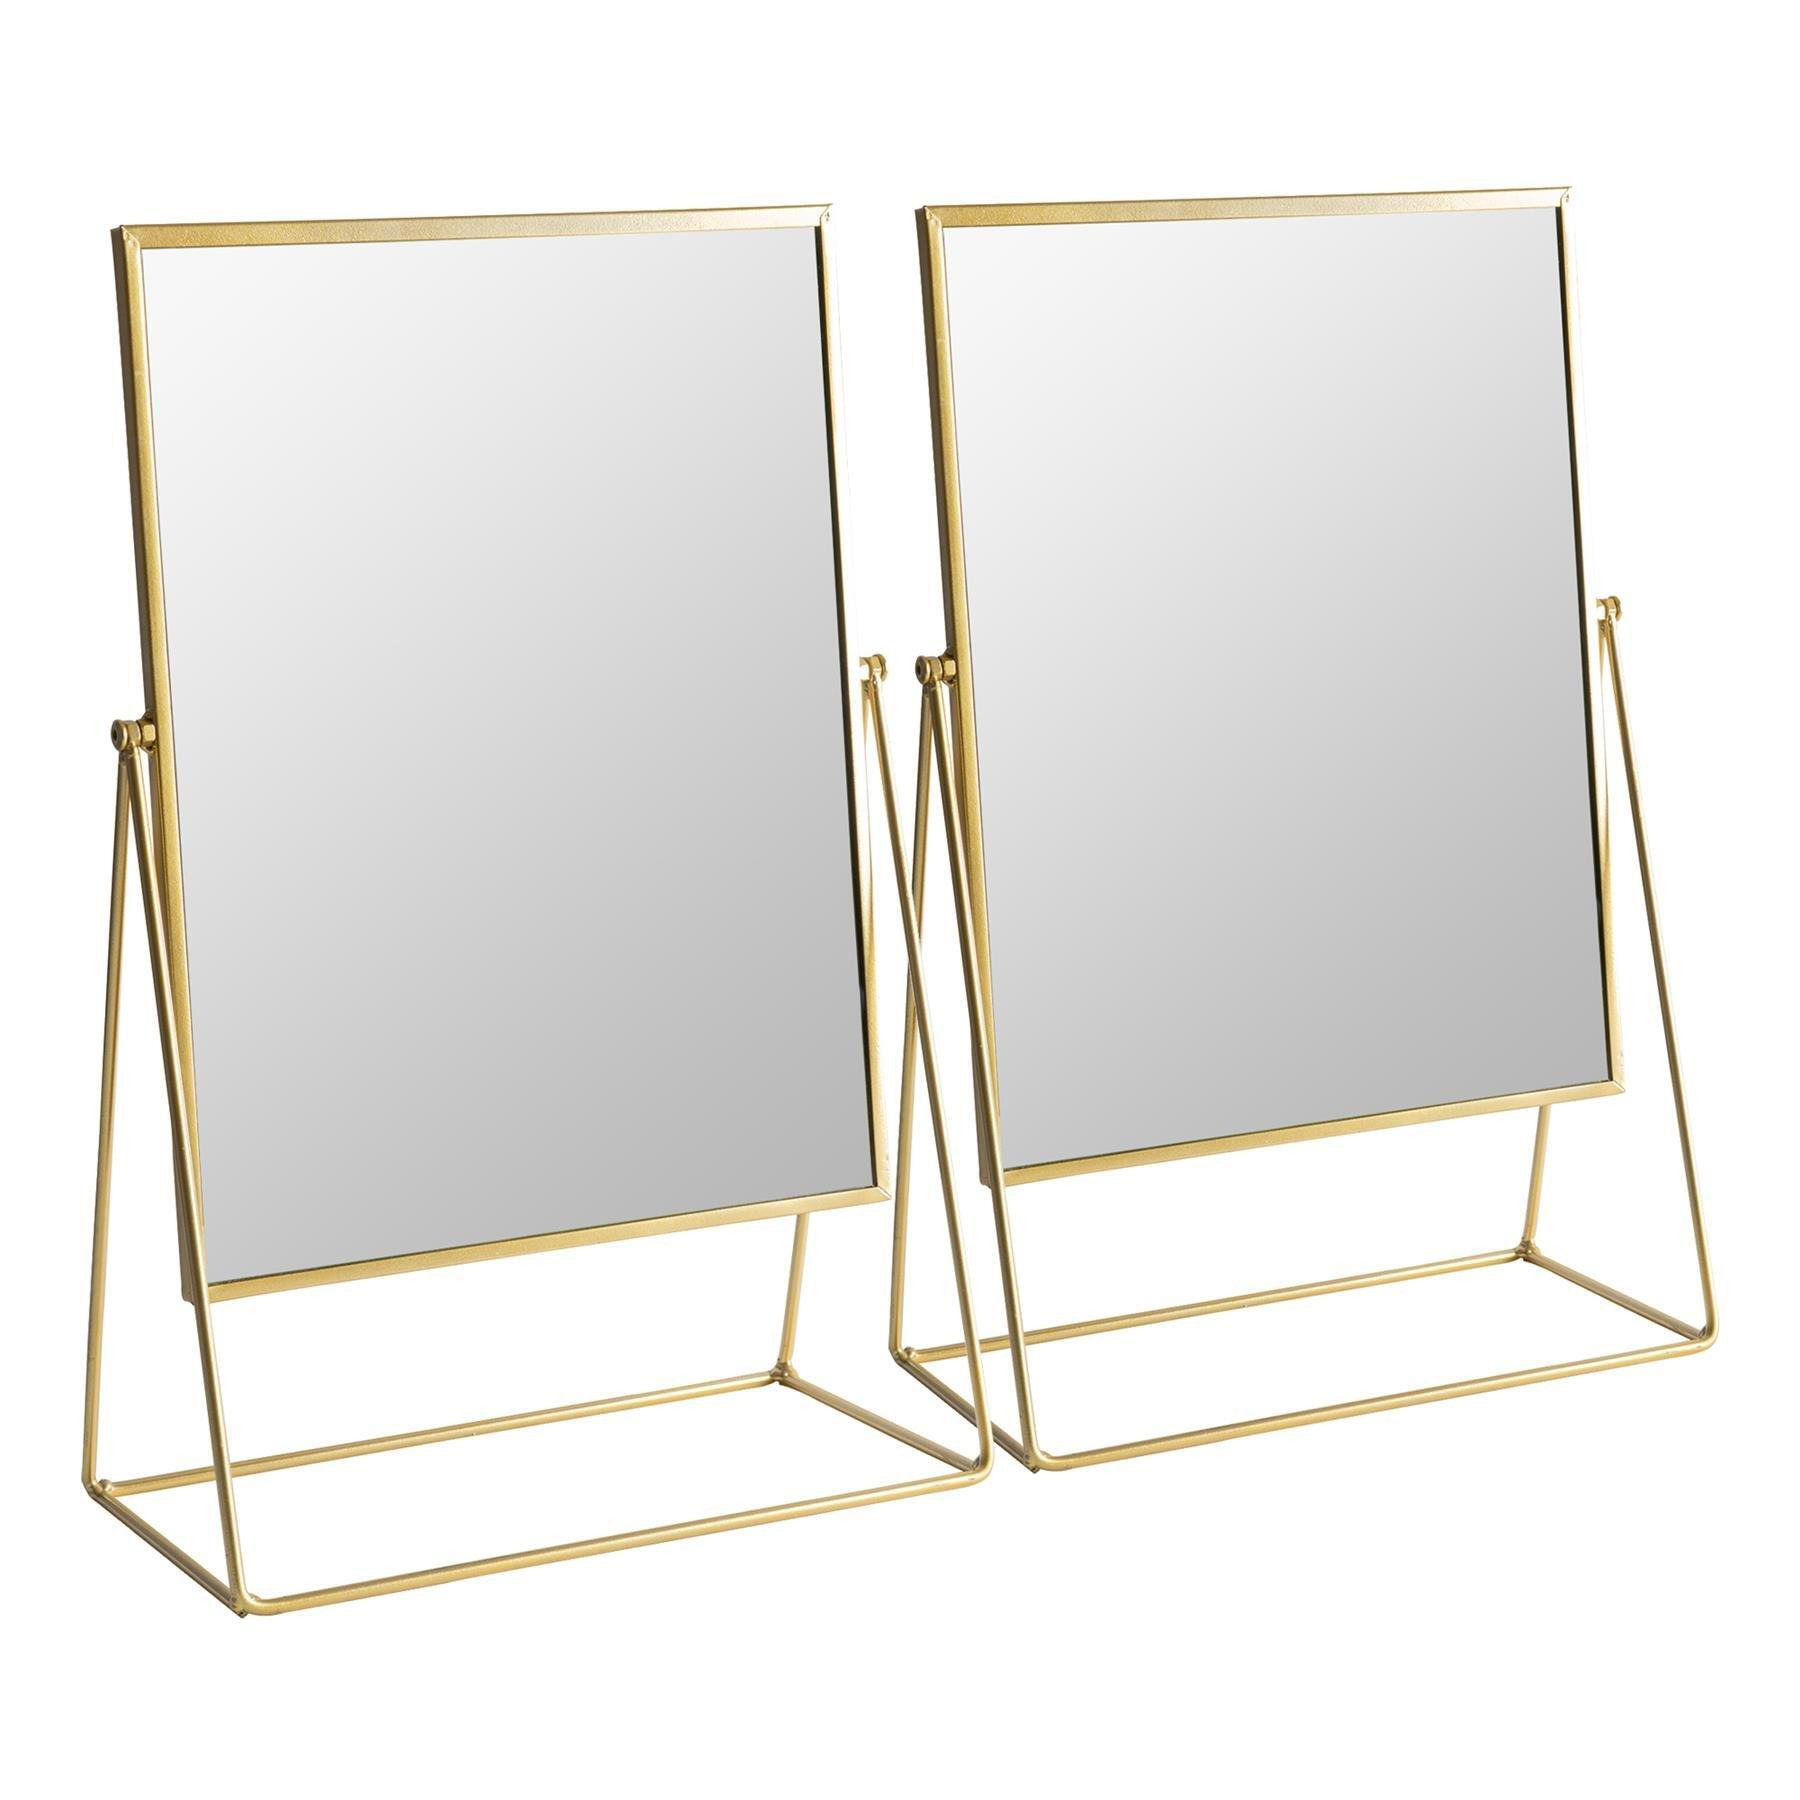 32 x 50cm Rectangle Makeup Mirrors Pack of 2 - image 1